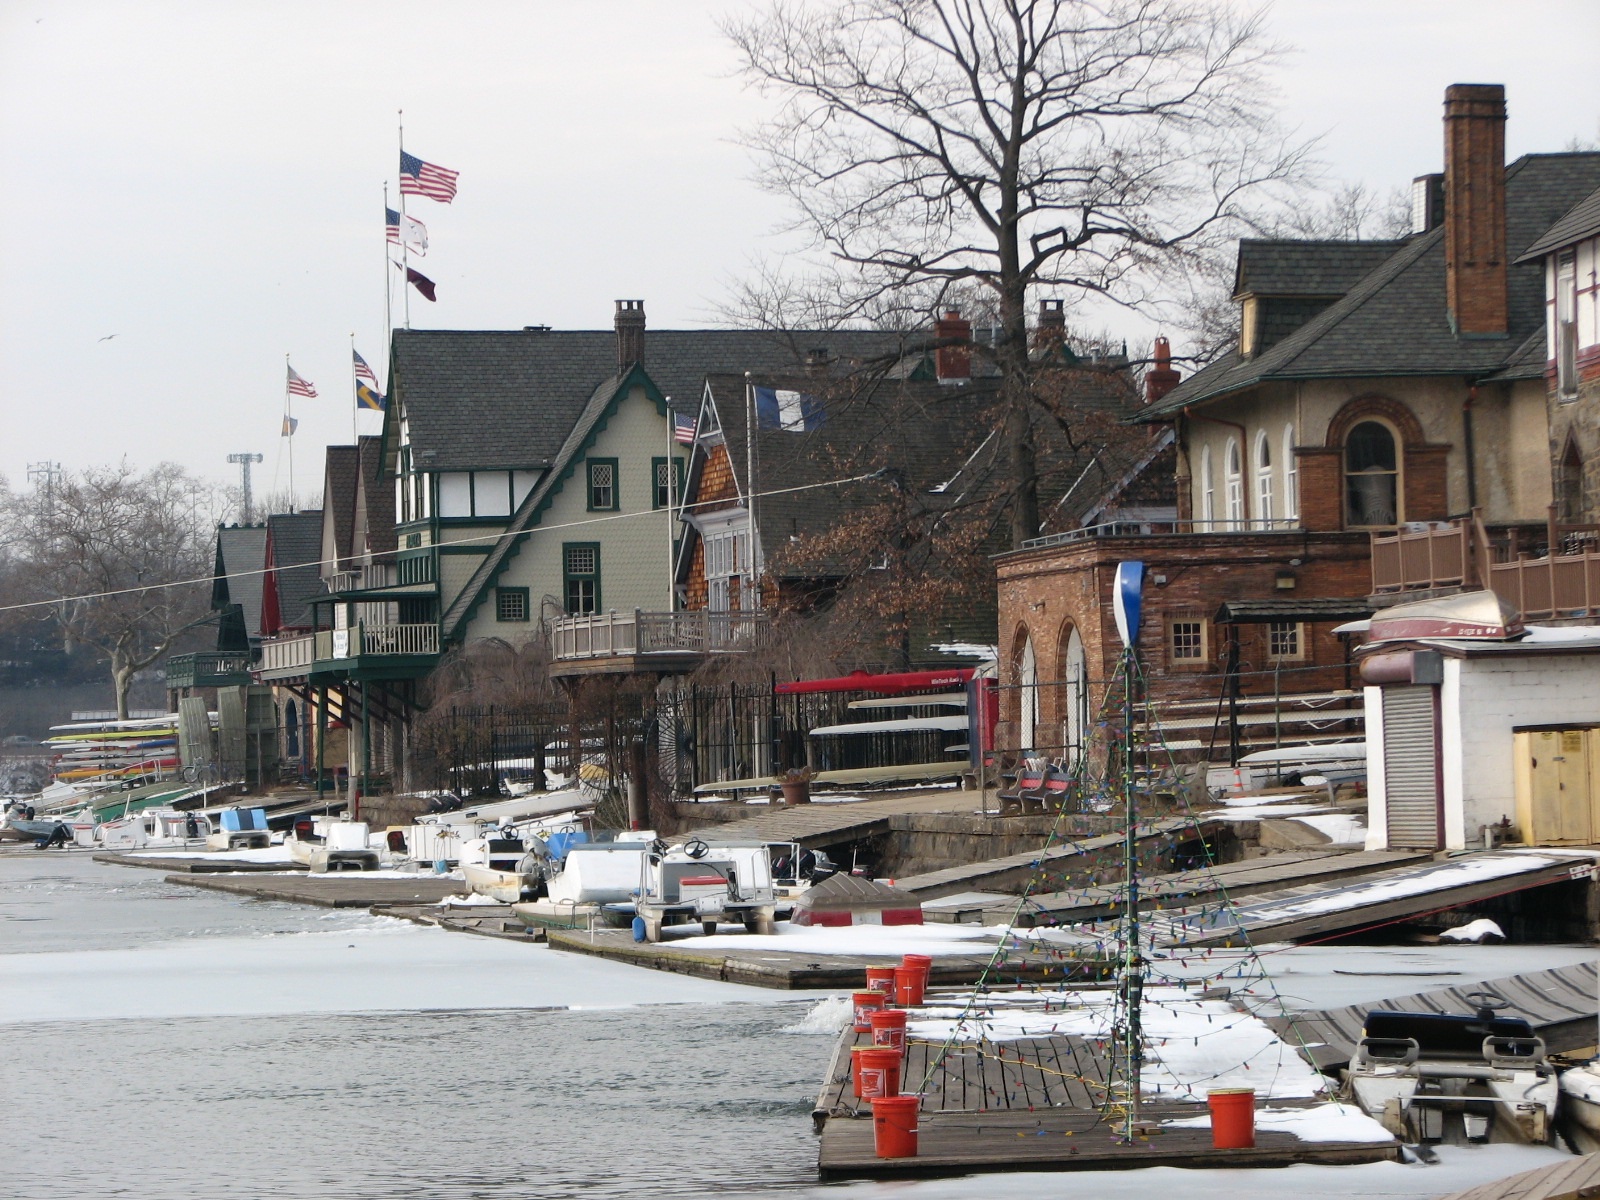 Looking west along the waterfront of Boathouse Row.